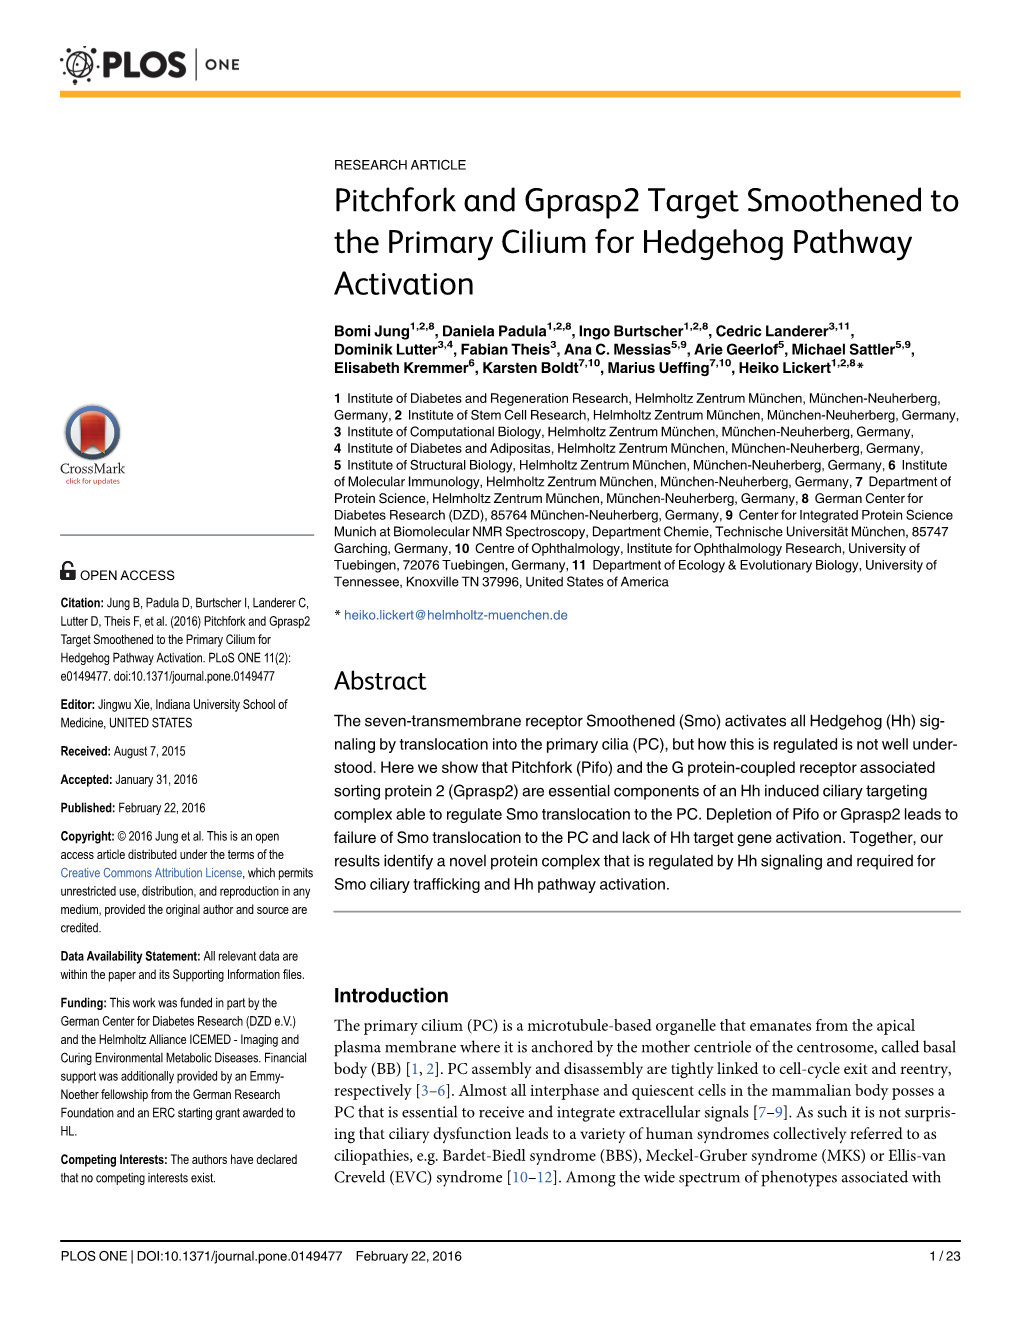 Pitchfork and Gprasp2 Target Smoothened to the Primary Cilium for Hedgehog Pathway Activation